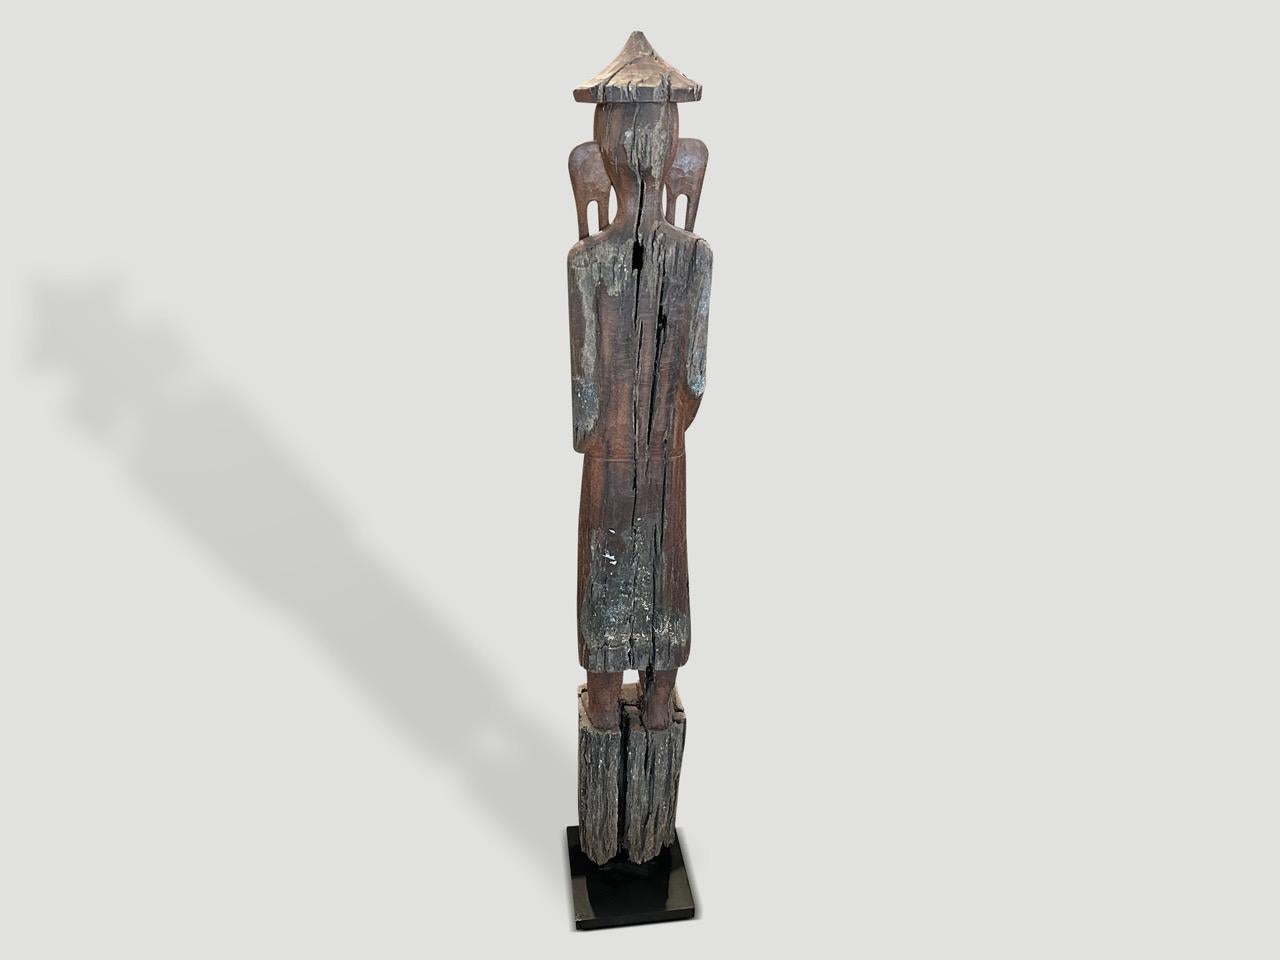 Tribal Andrianna Shamaris Antique Statue from Borneo For Sale